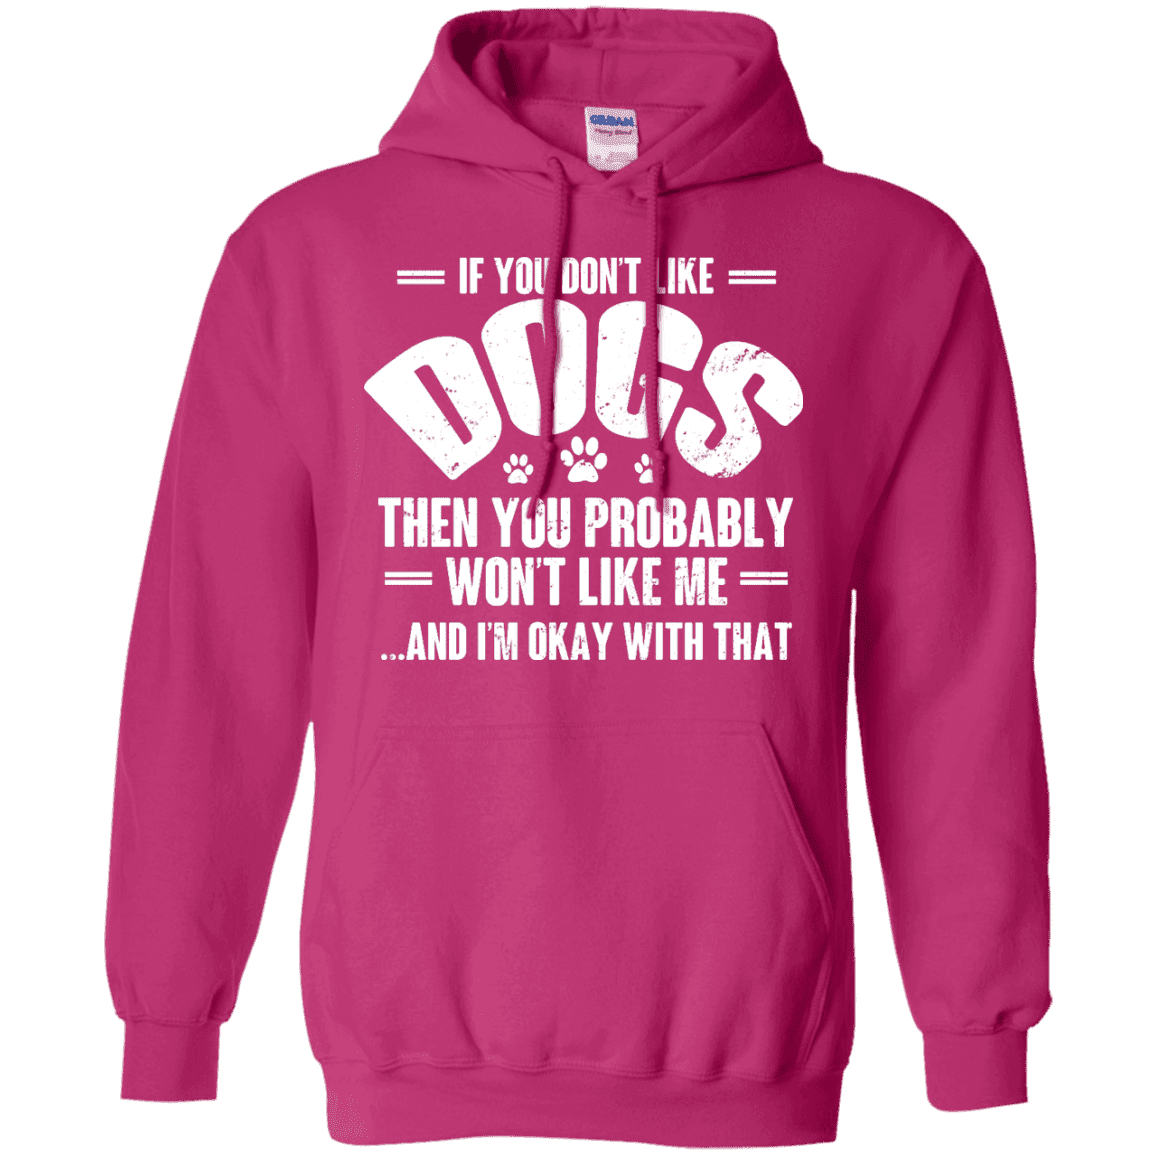 If You Don't Like Dogs - Hoodie – Rescuers Club